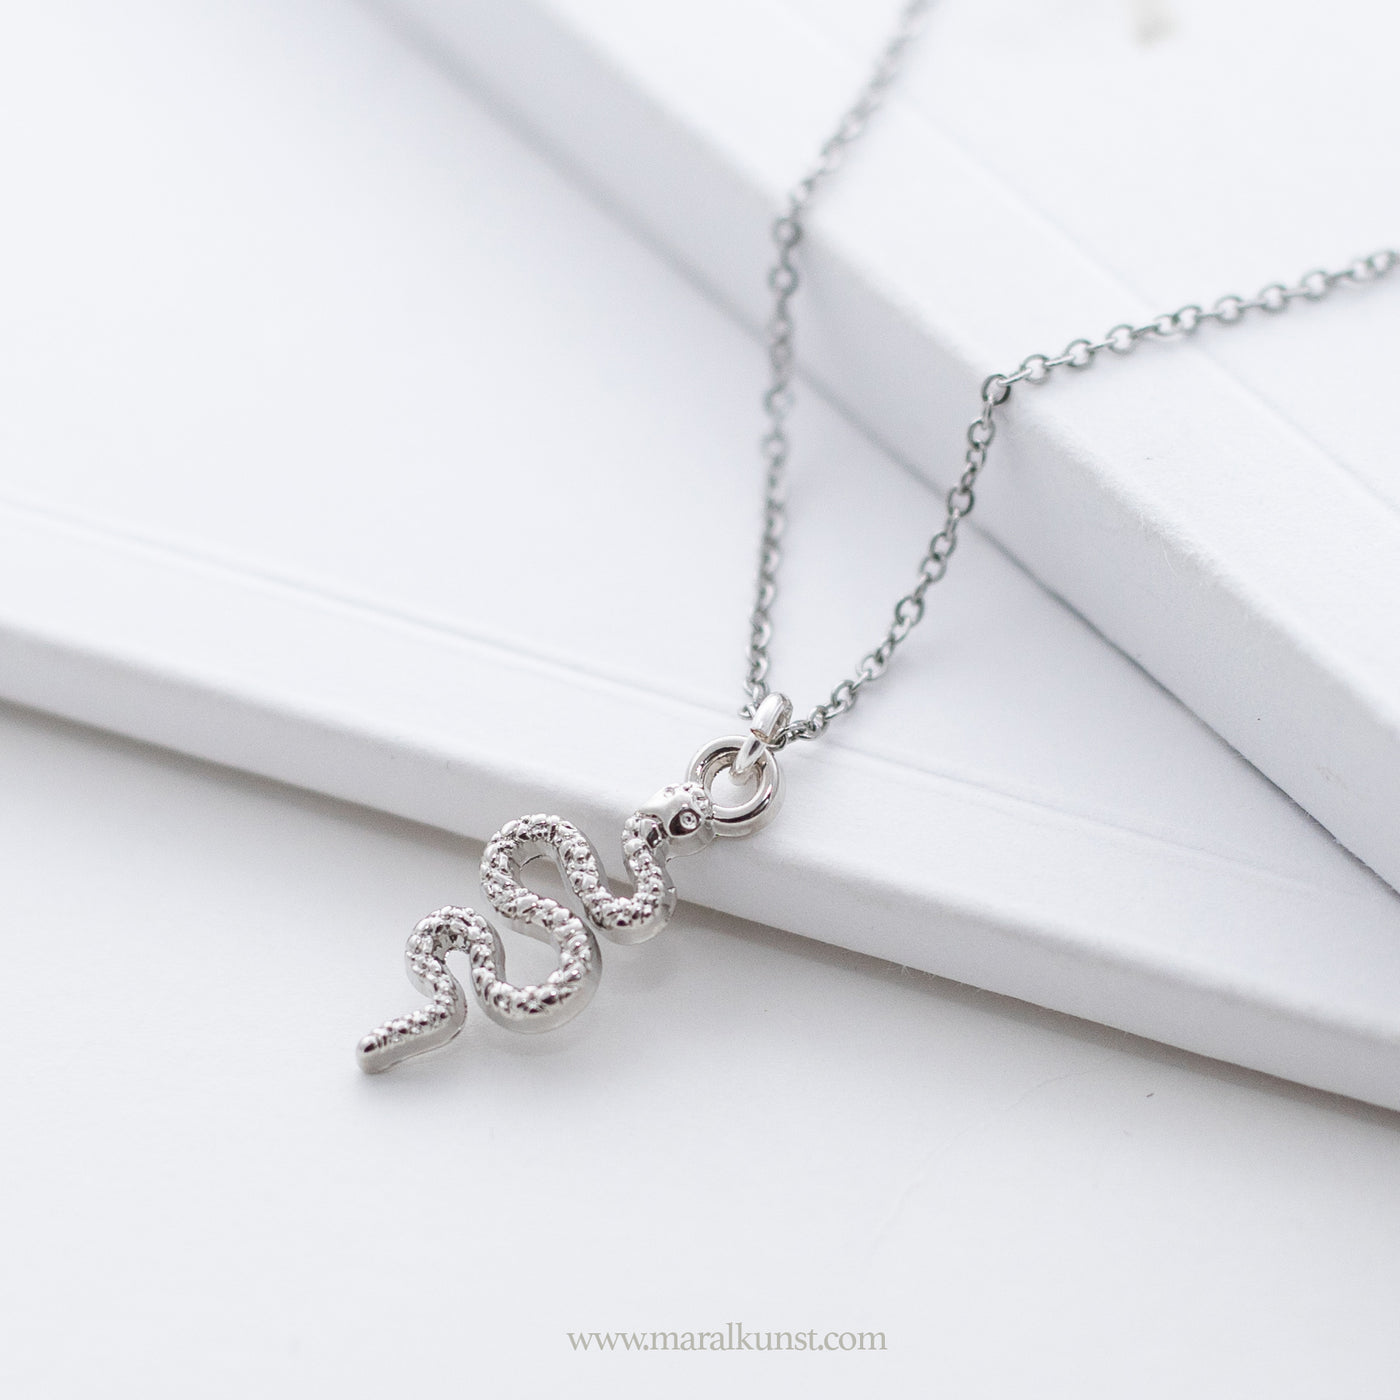 Snake stainless steel necklace